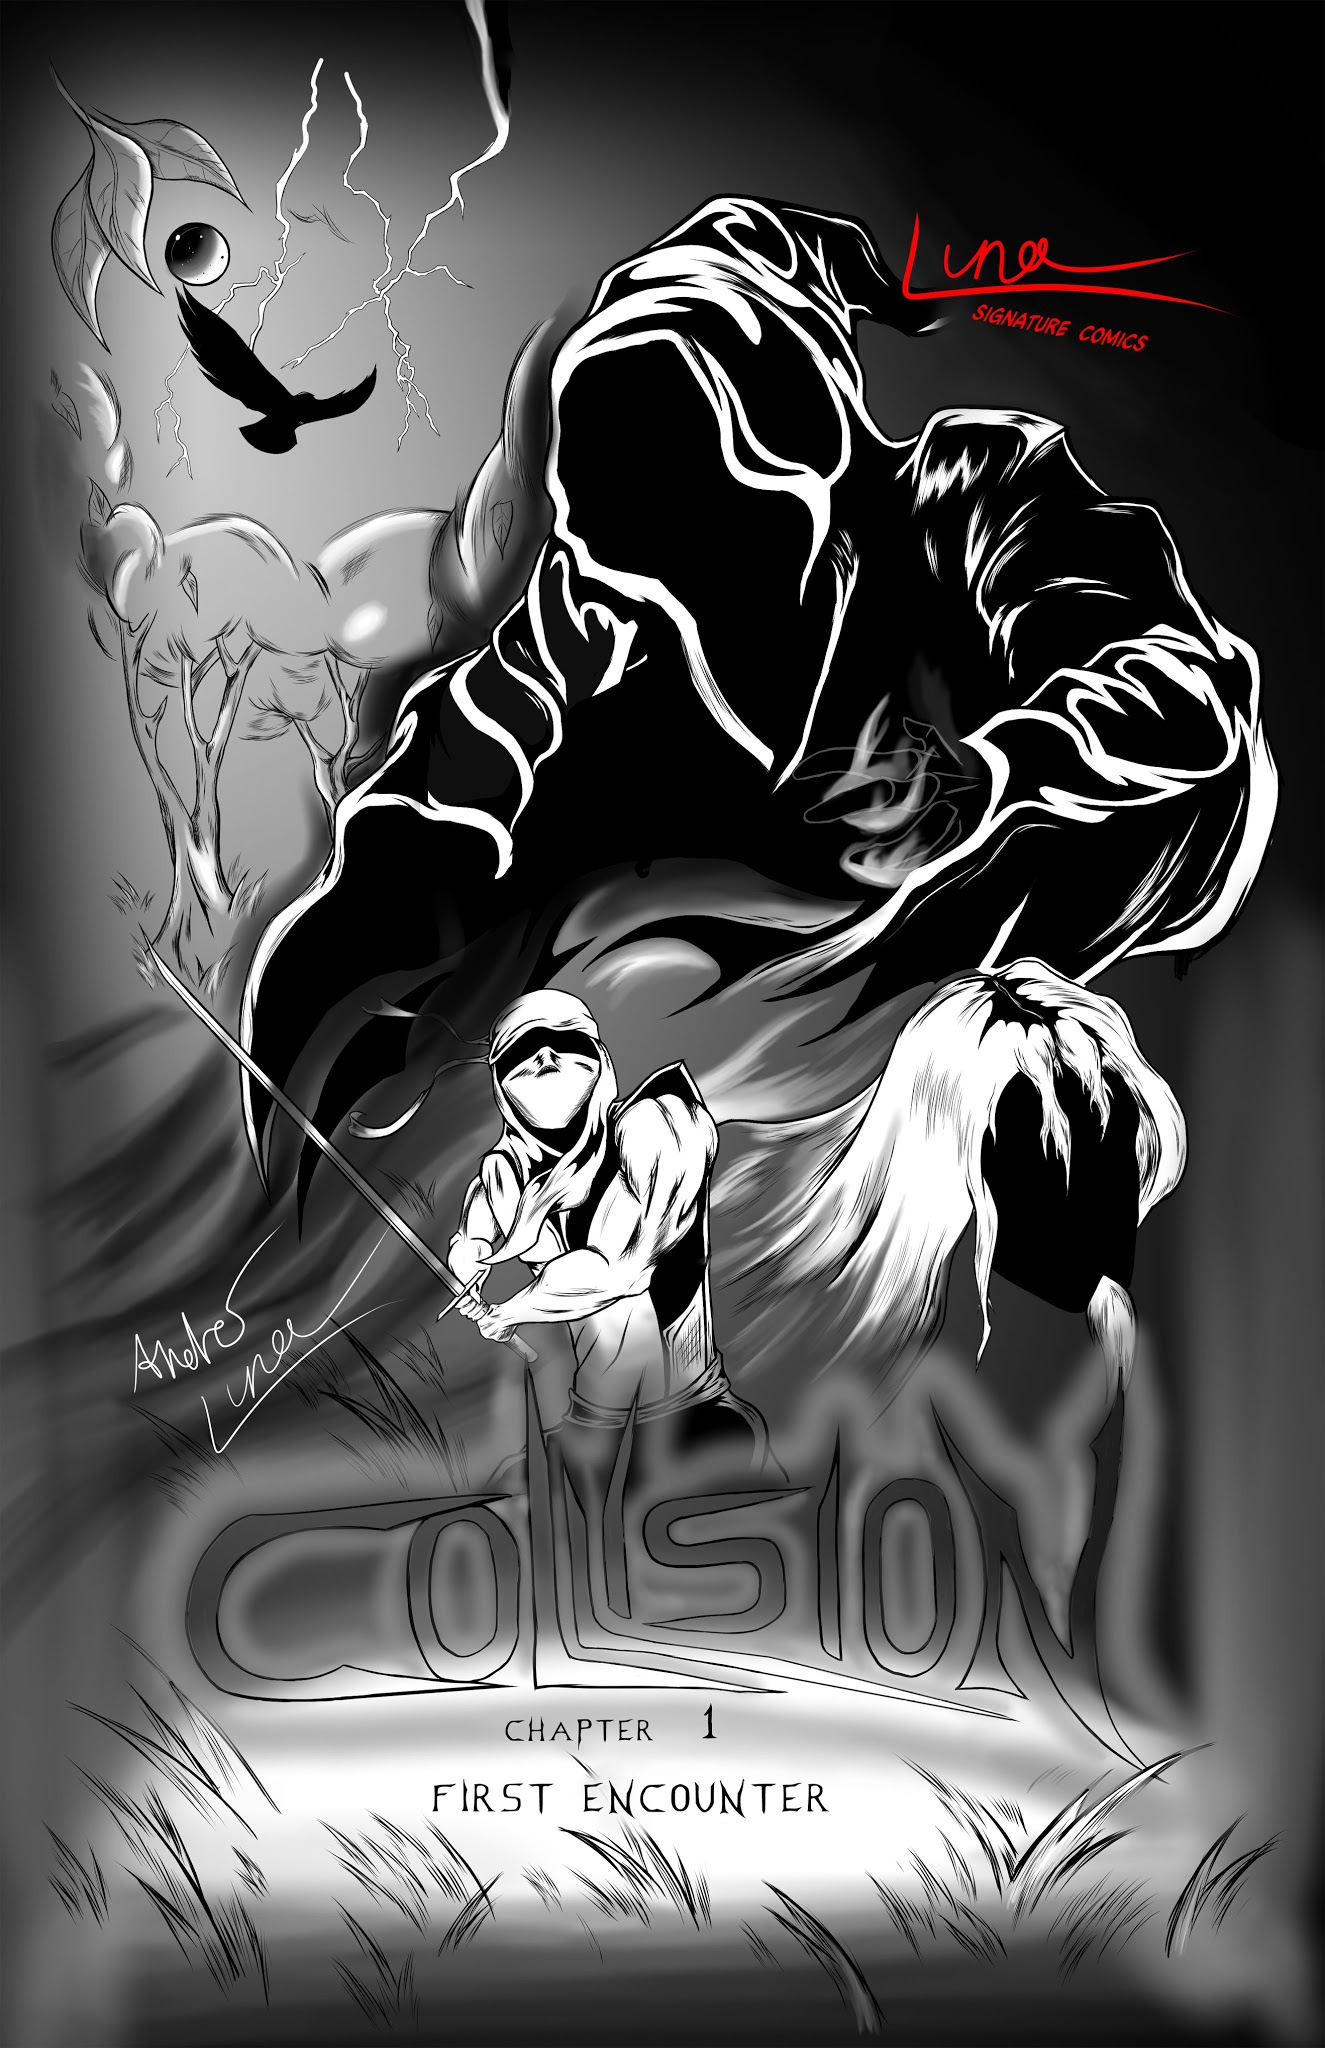 Read online Collision comic -  Issue #1 - 1